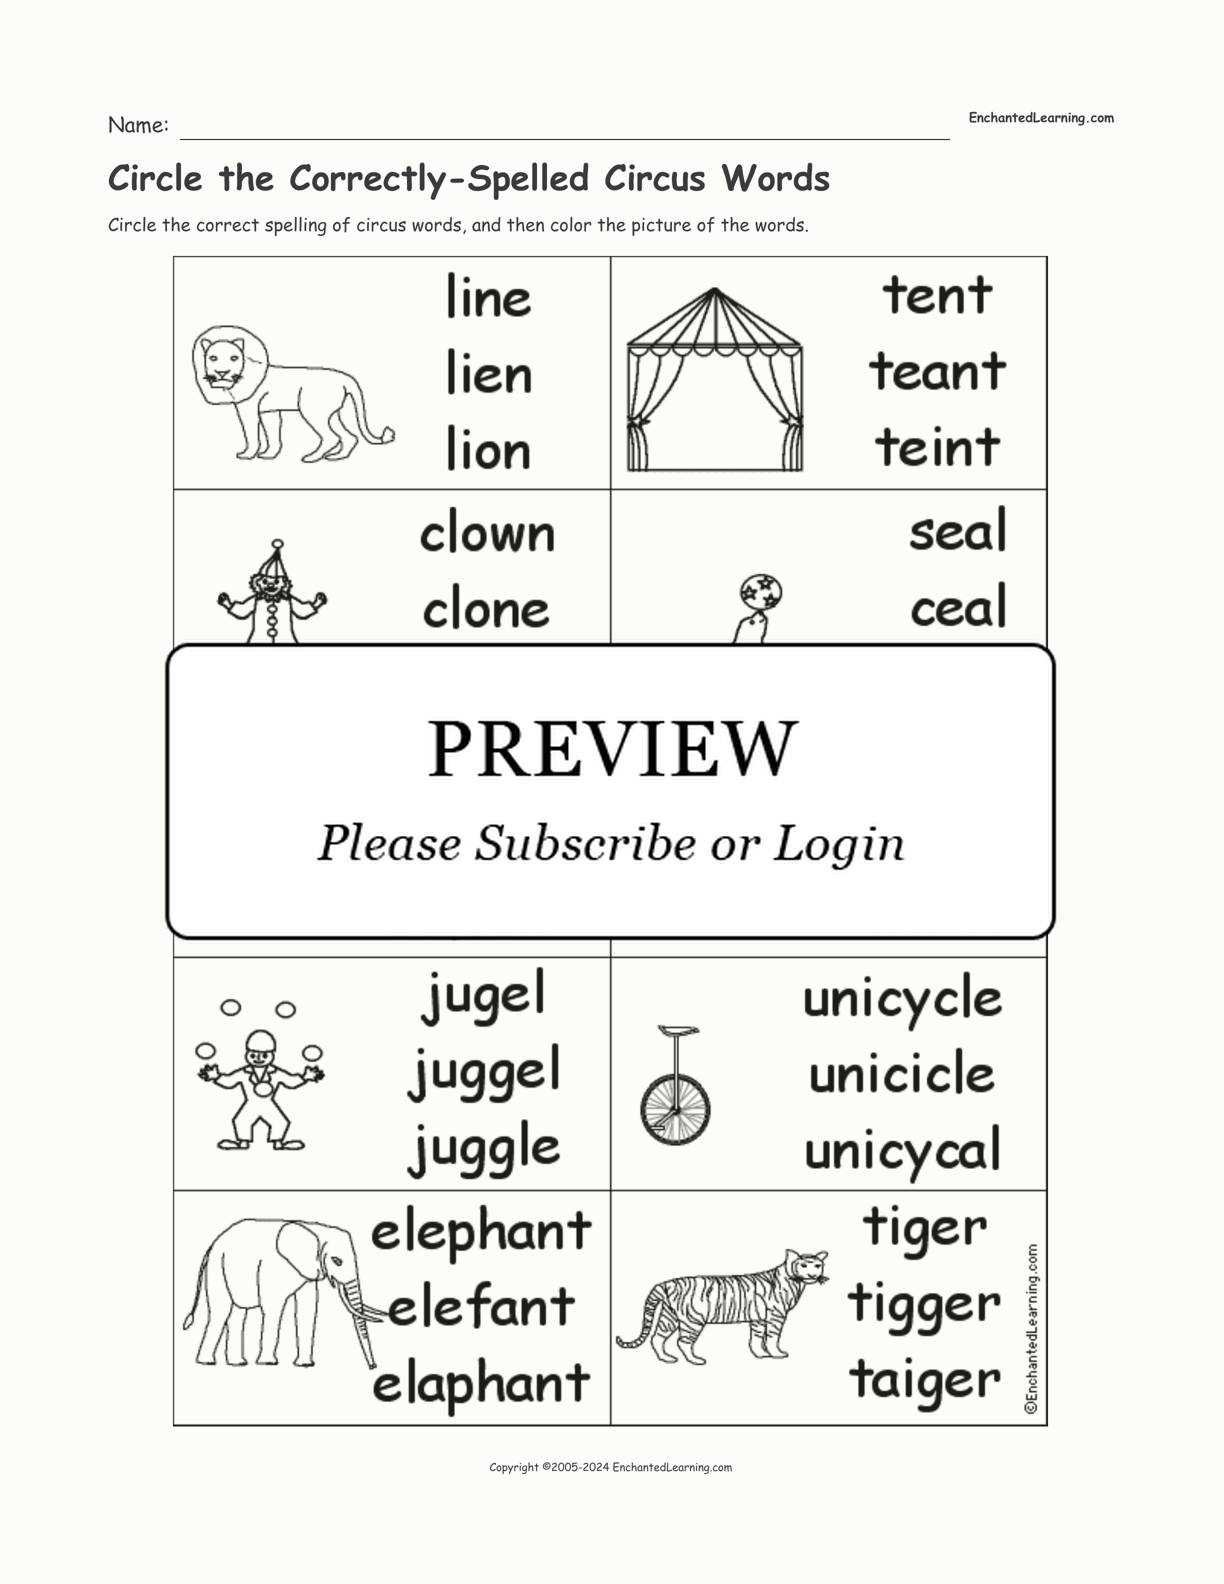 Circle the Correctly-Spelled Circus Words interactive worksheet page 1